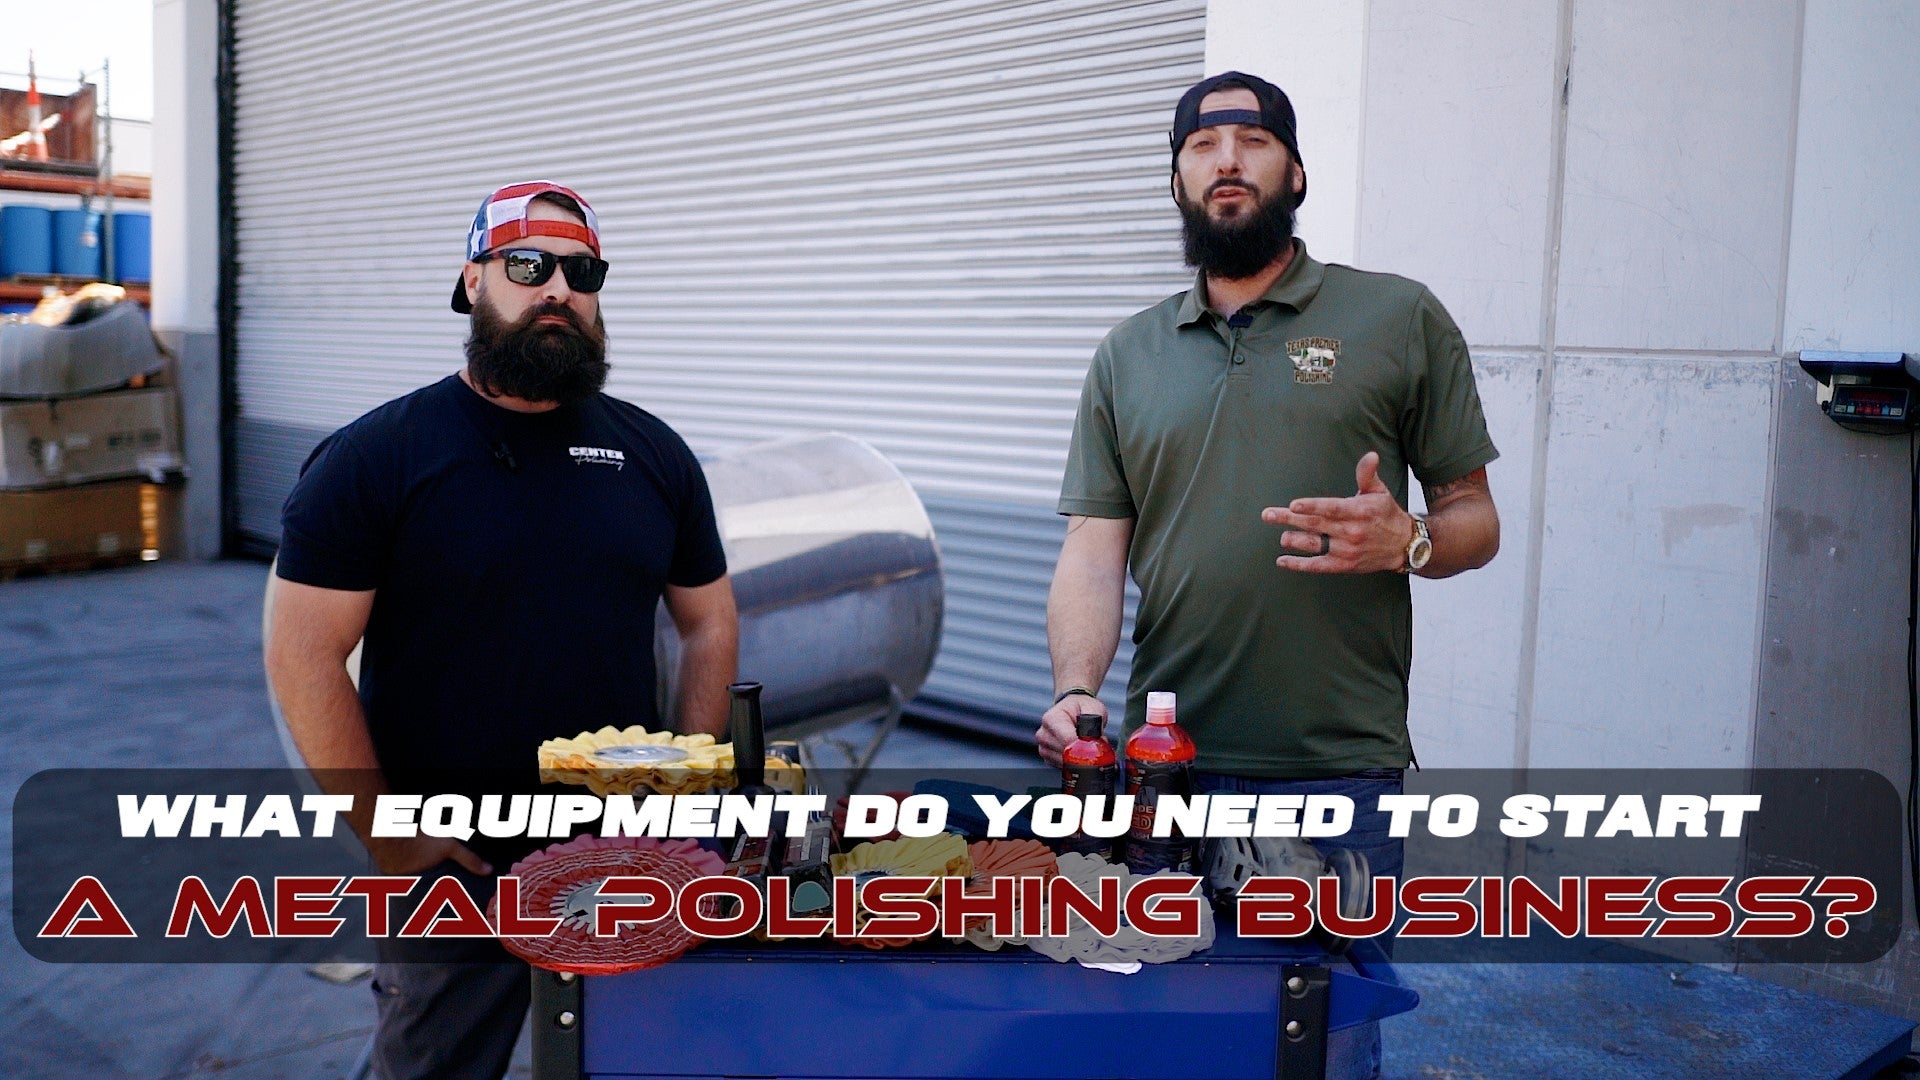 What equipment do you need to start a metal polishing business?